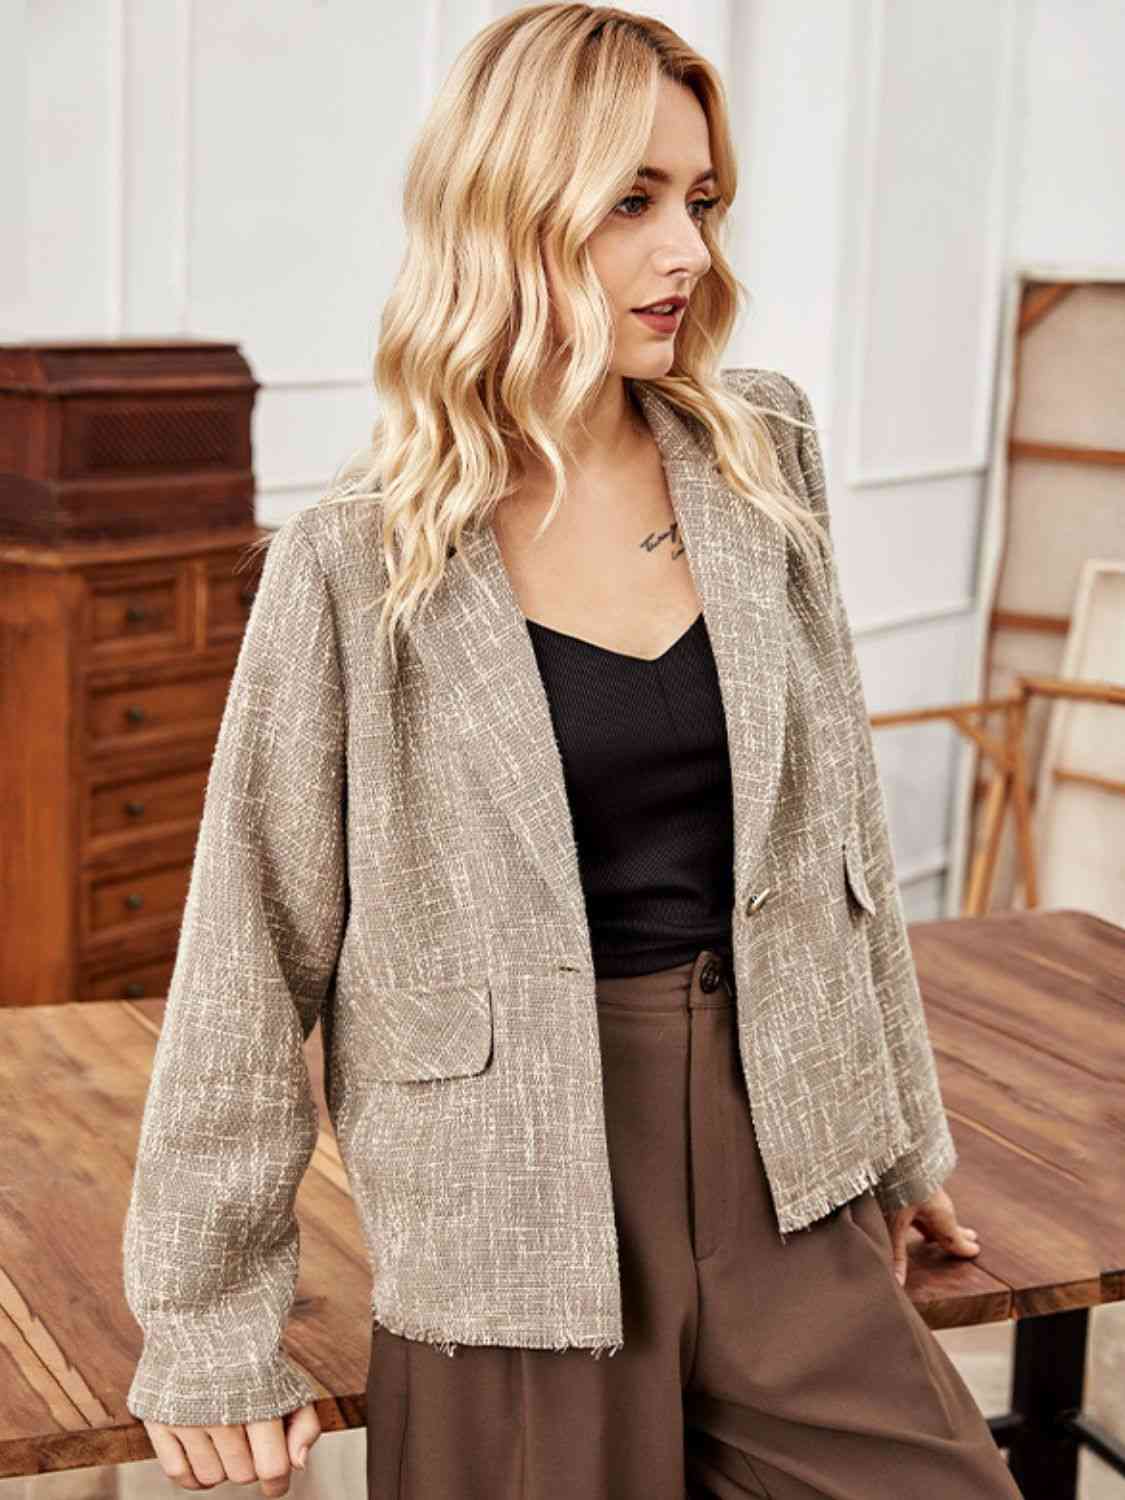 A long sleeve blazer, offering a sophisticated and professional style with its extended sleeves for a polished appearance.